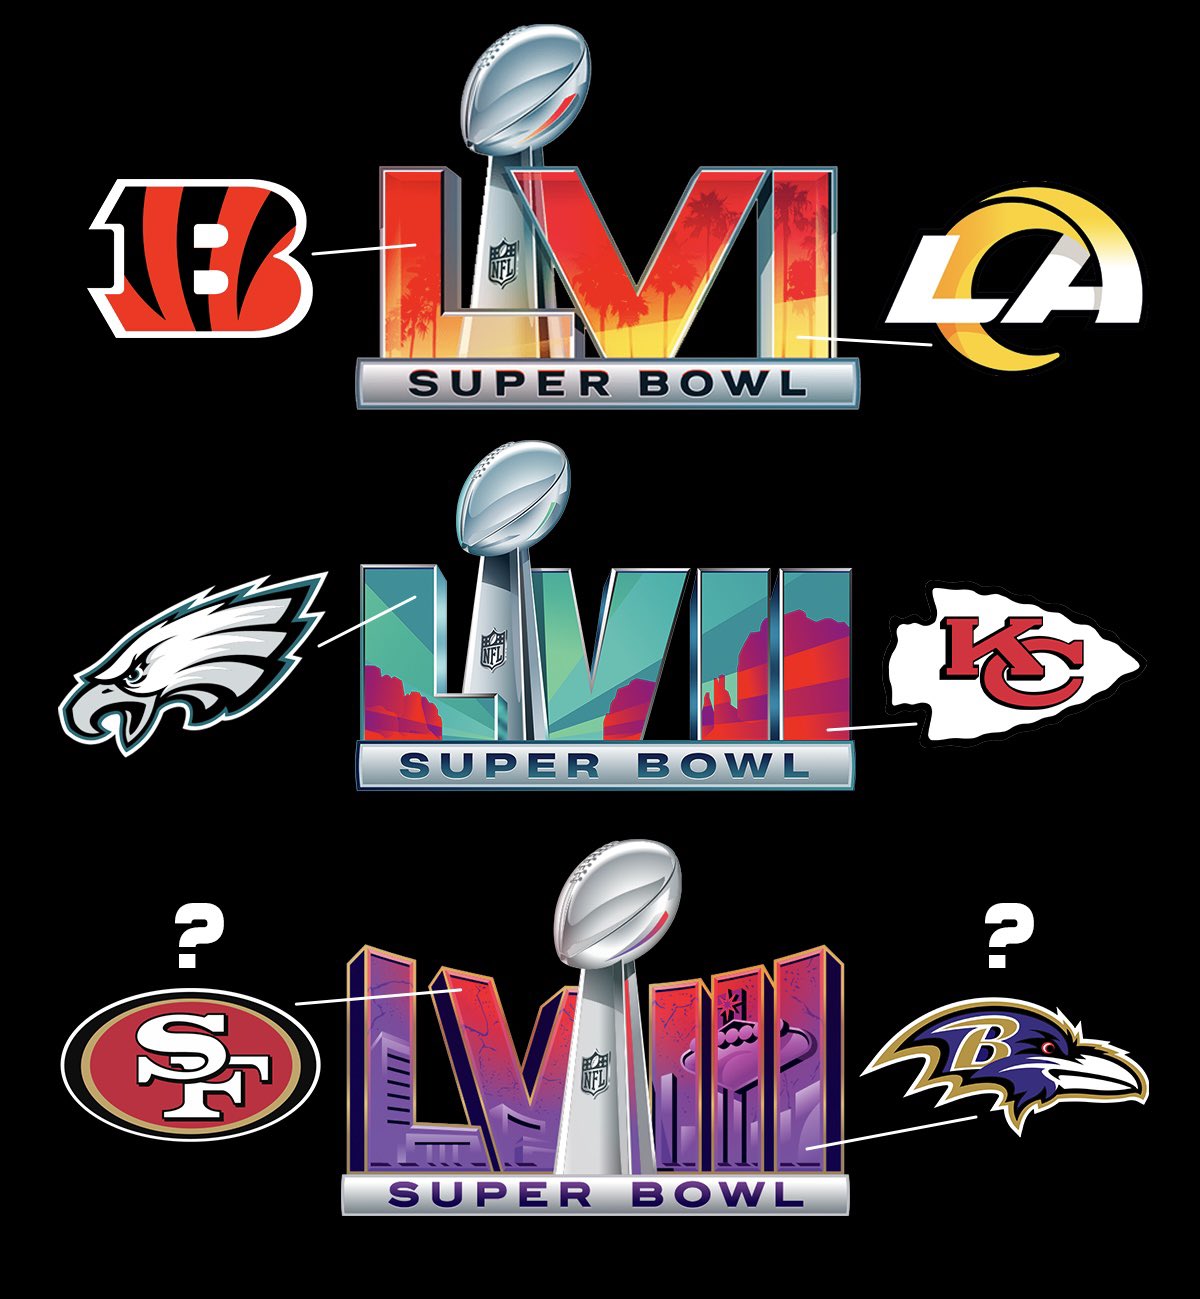 The NFL Super Bowl logo conspiracy is so outlandish I…